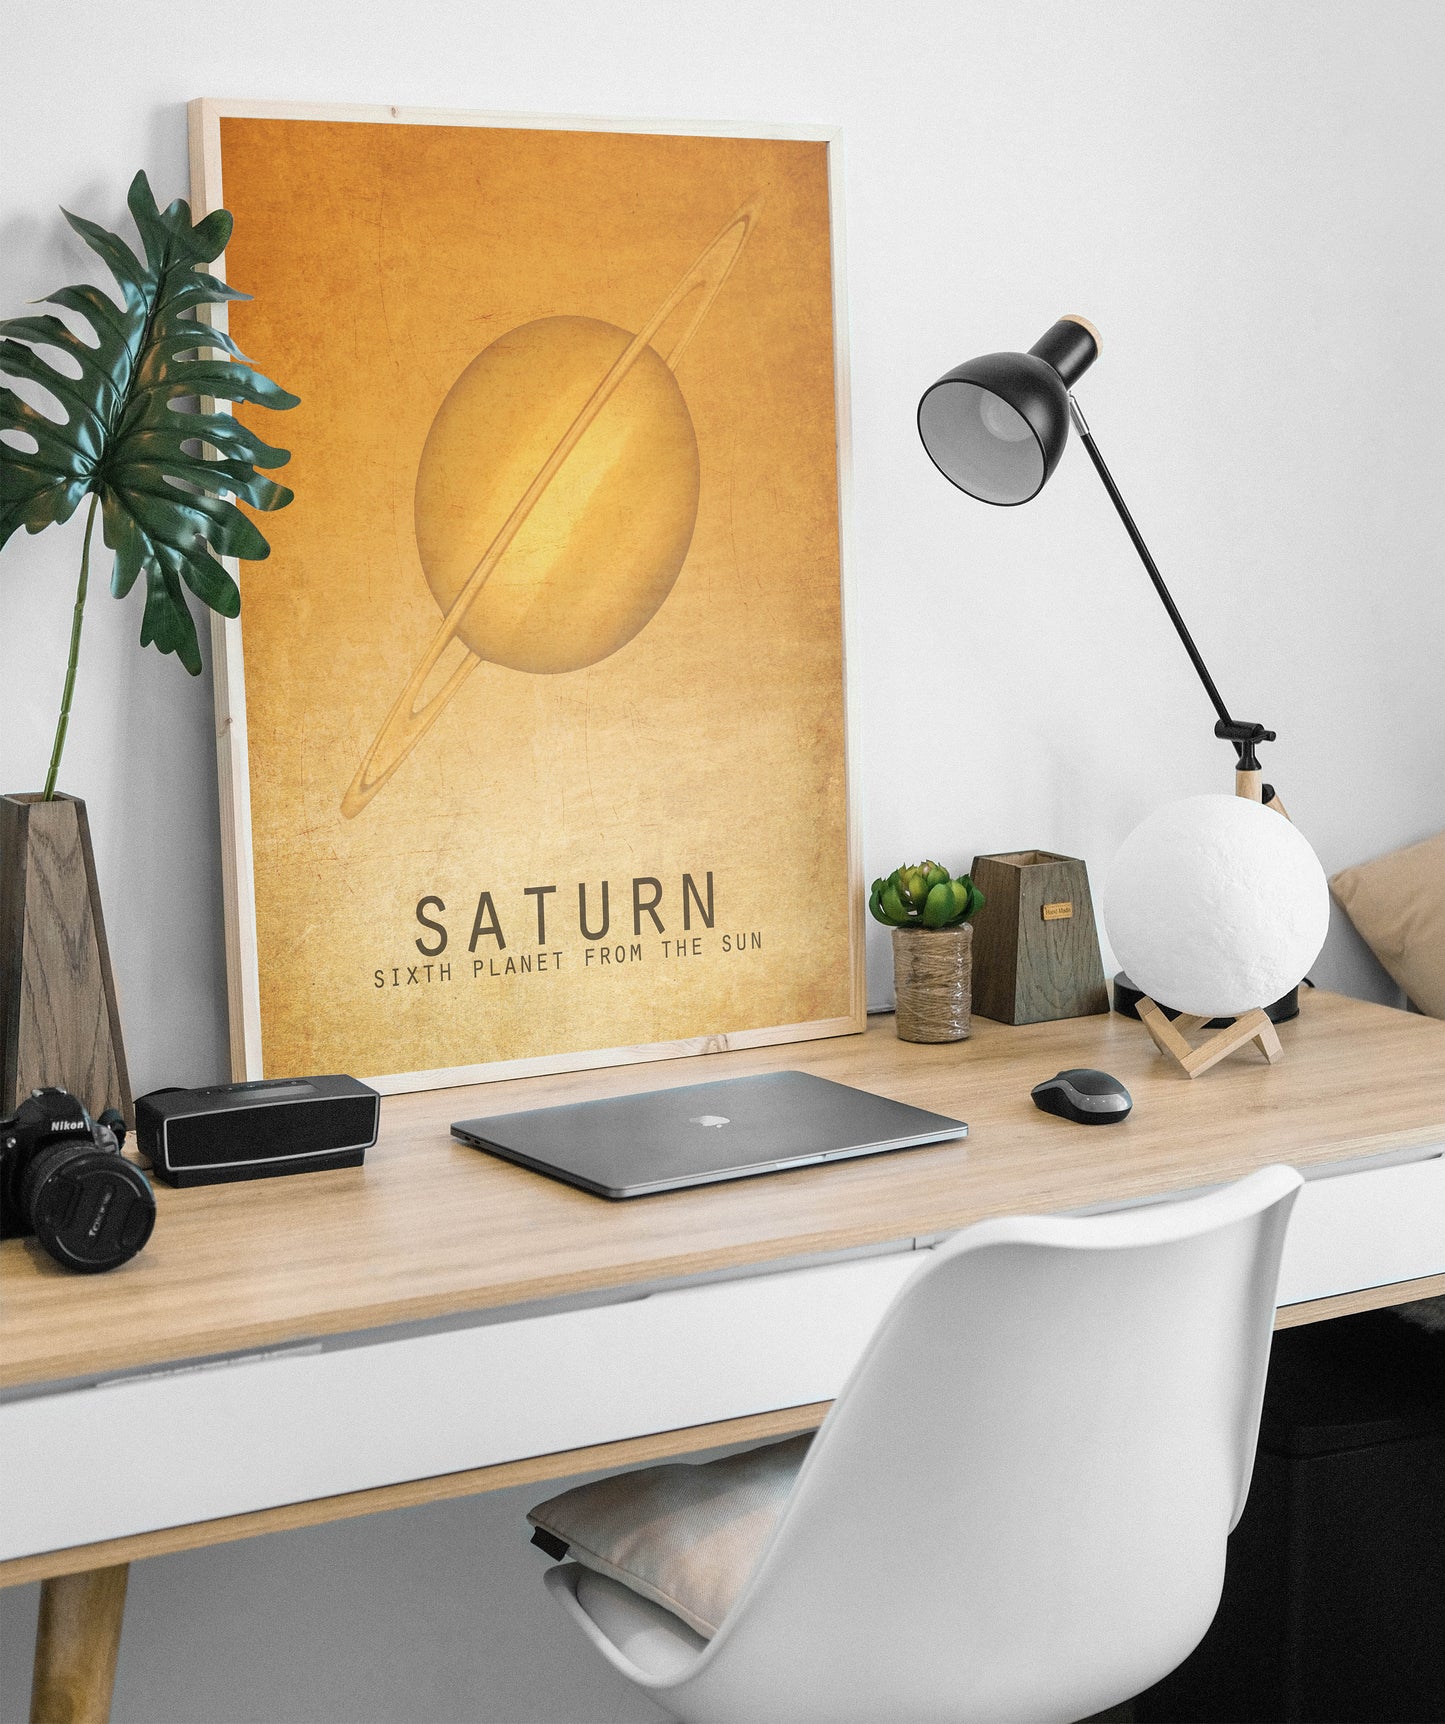 Saturns Rings Solar System Art Print, Planet and Outer Space Decor